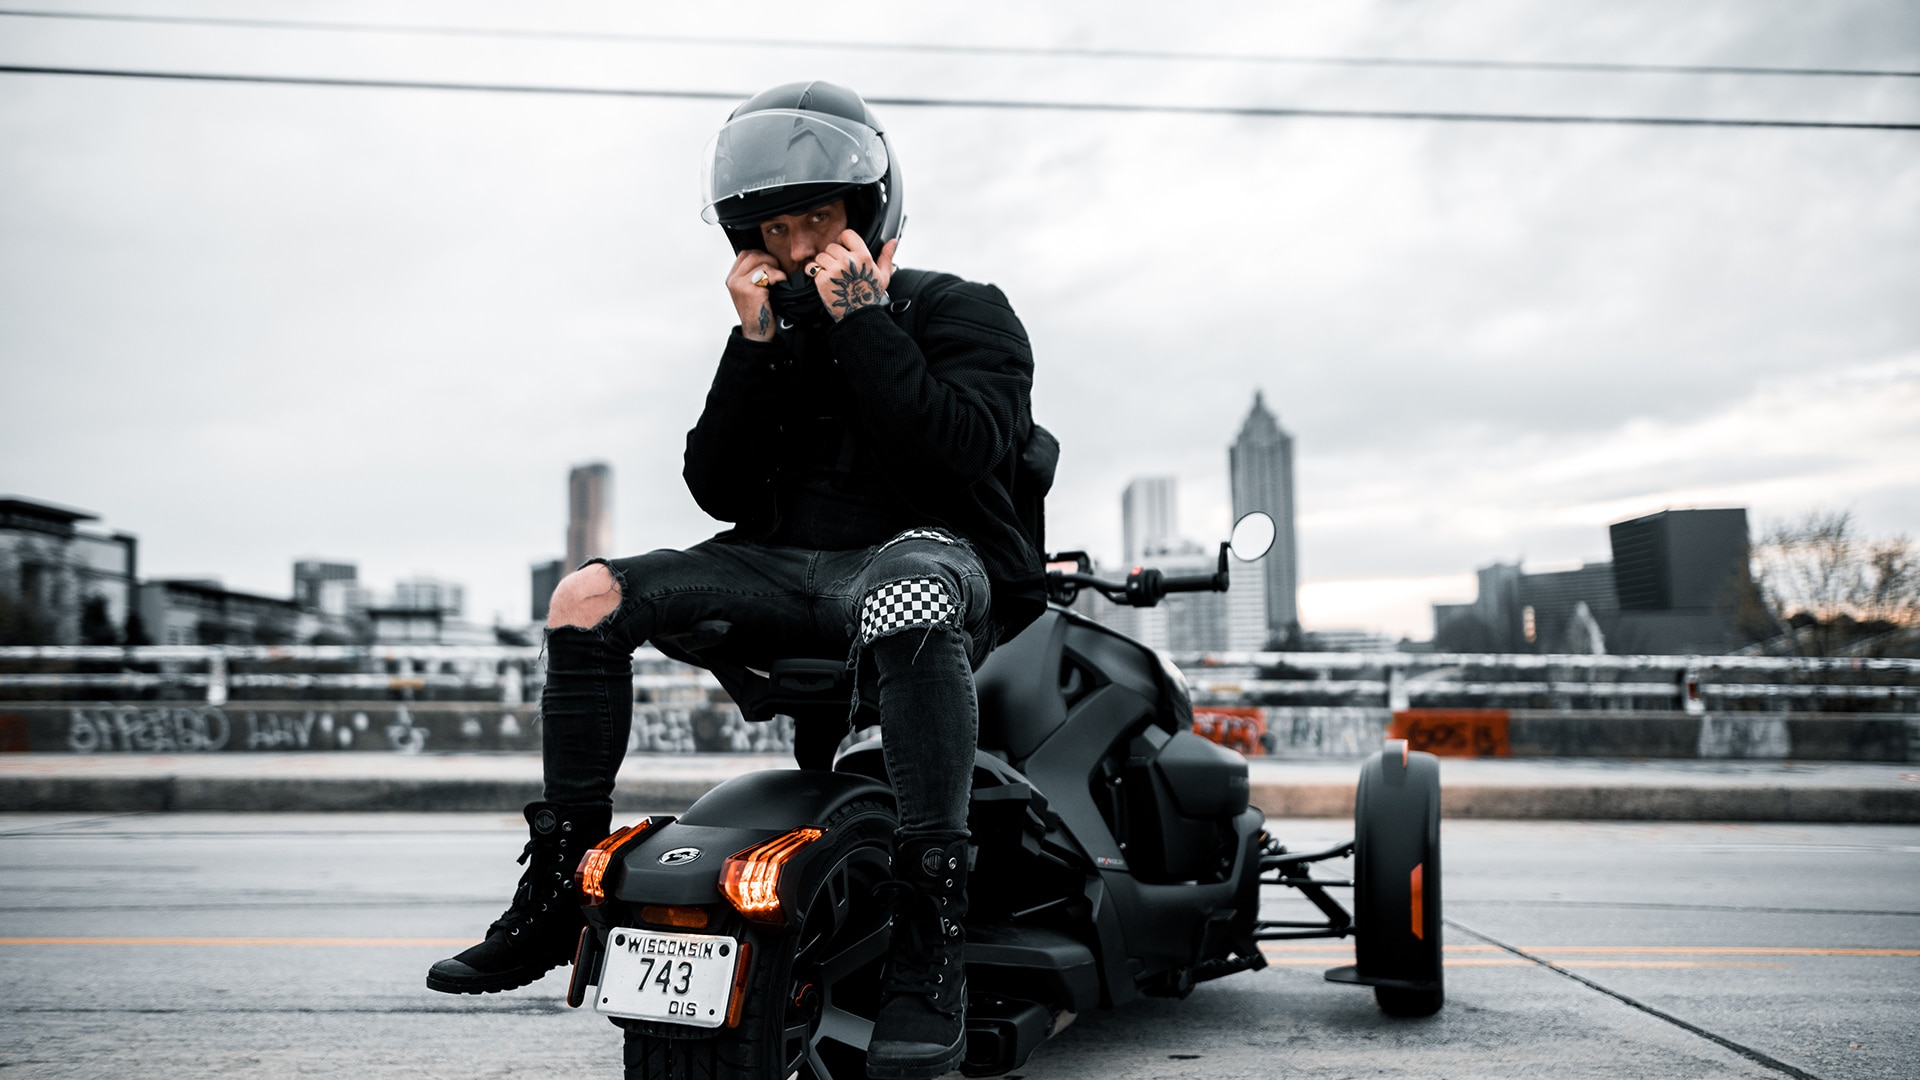 Can-Am On-Road ambassador Creative Ryan sitting on this 3-wheel motorcycle about to remove his helmet